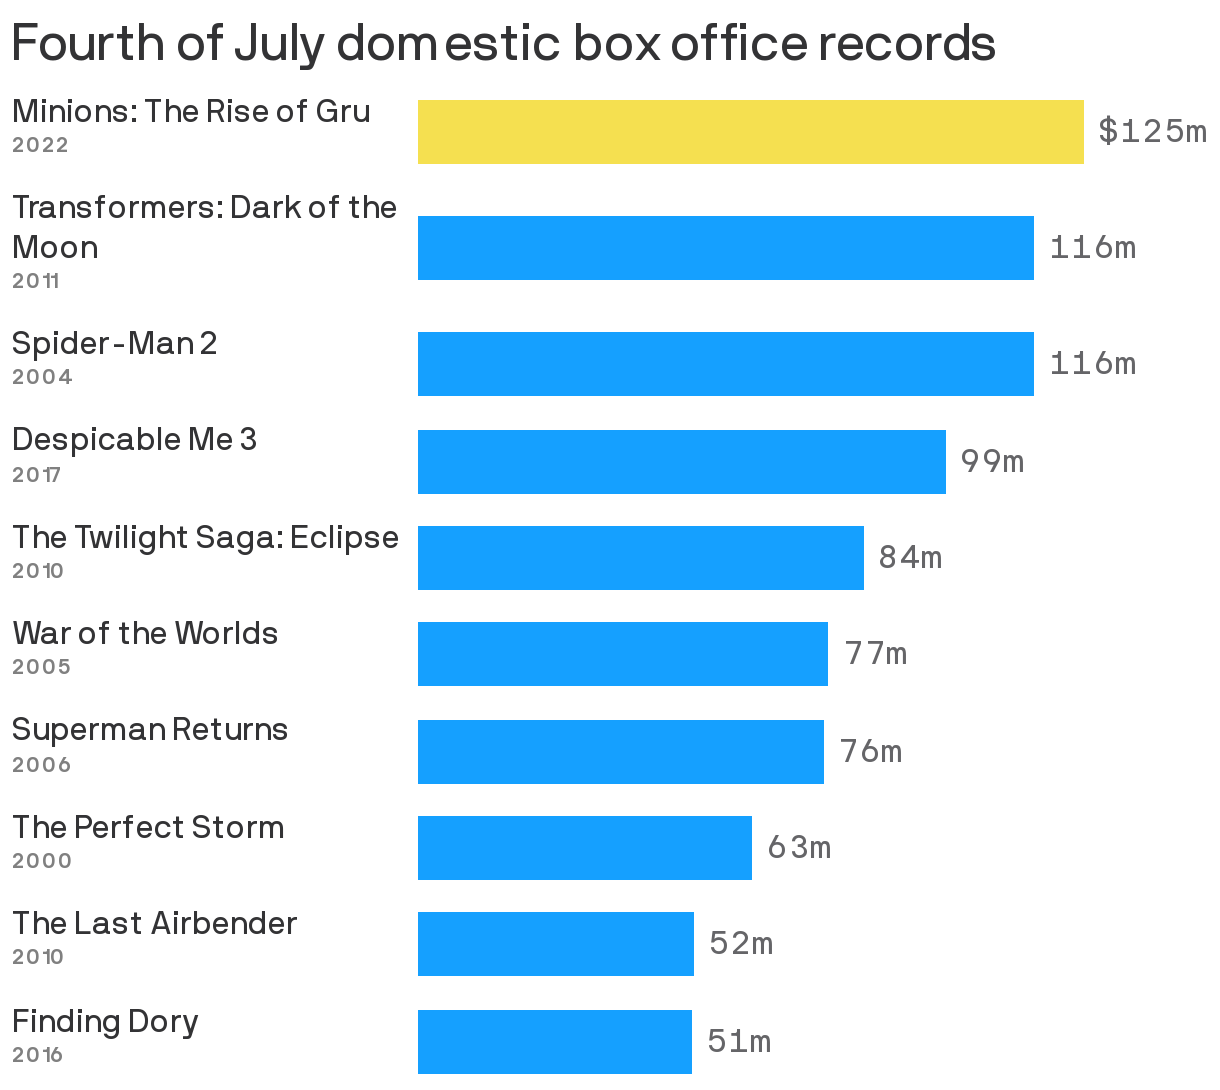 Fourth of July domestic box office records